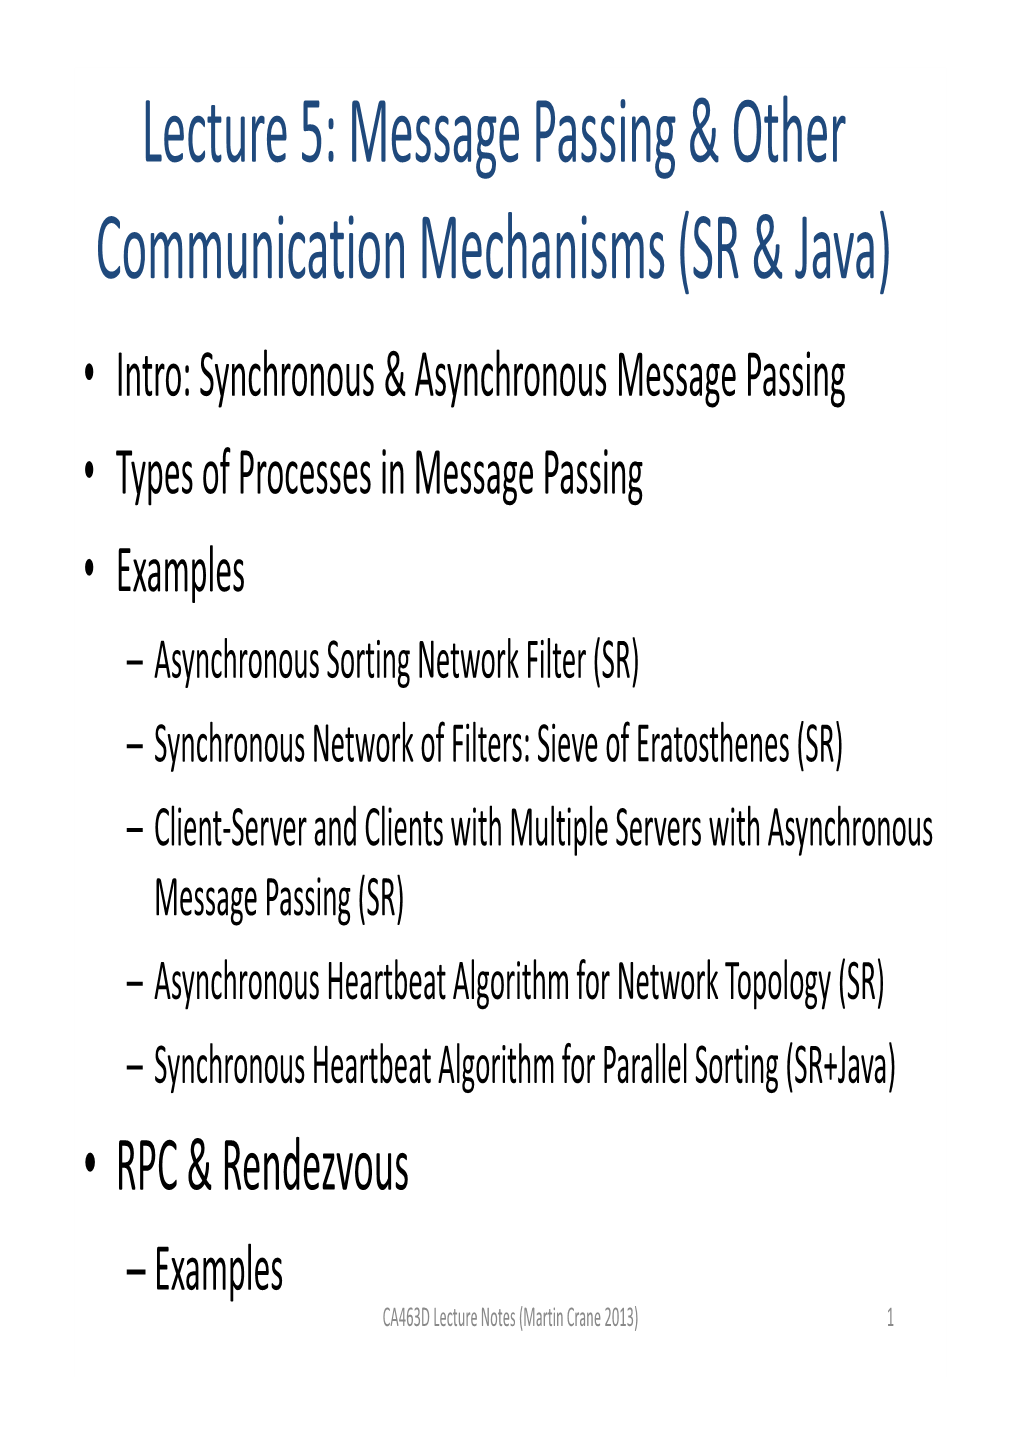 Lecture 5: Message Passing & Other Communication Mechanisms (SR